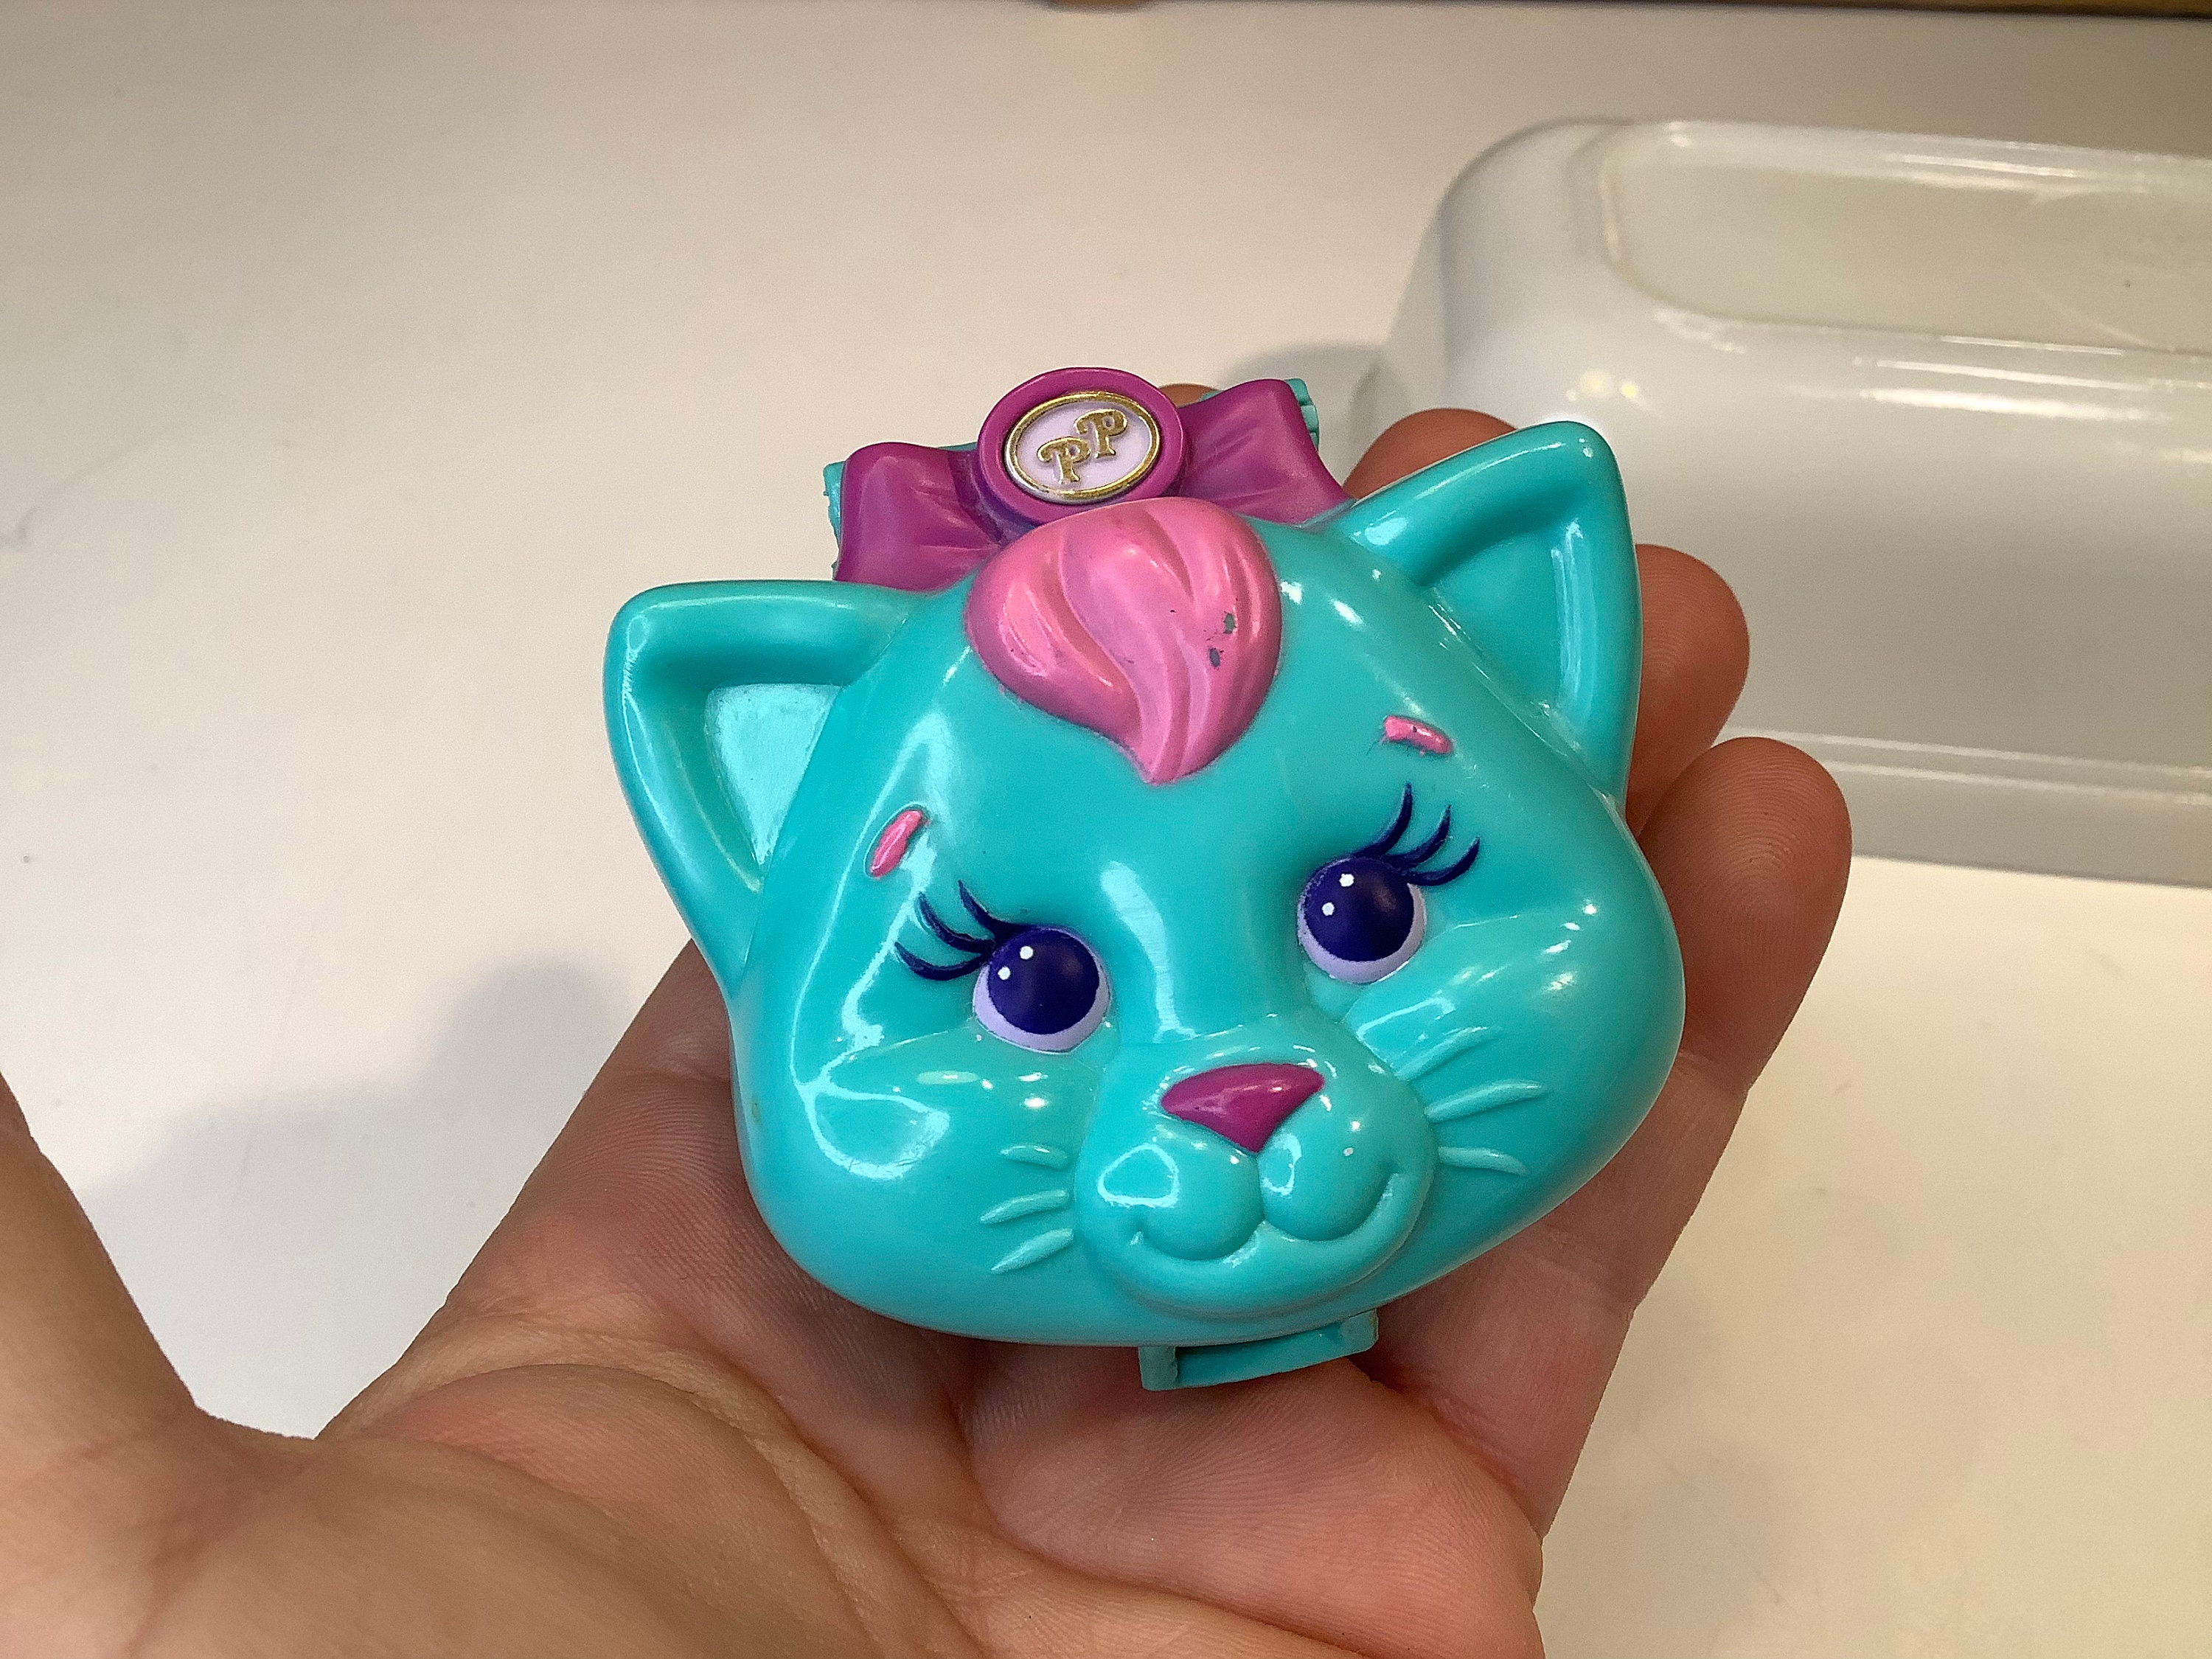 Vintage Polly Pocket Chat Polly Pocket Cuddly Kitty Vintage 1993 Bluebird  Compact 